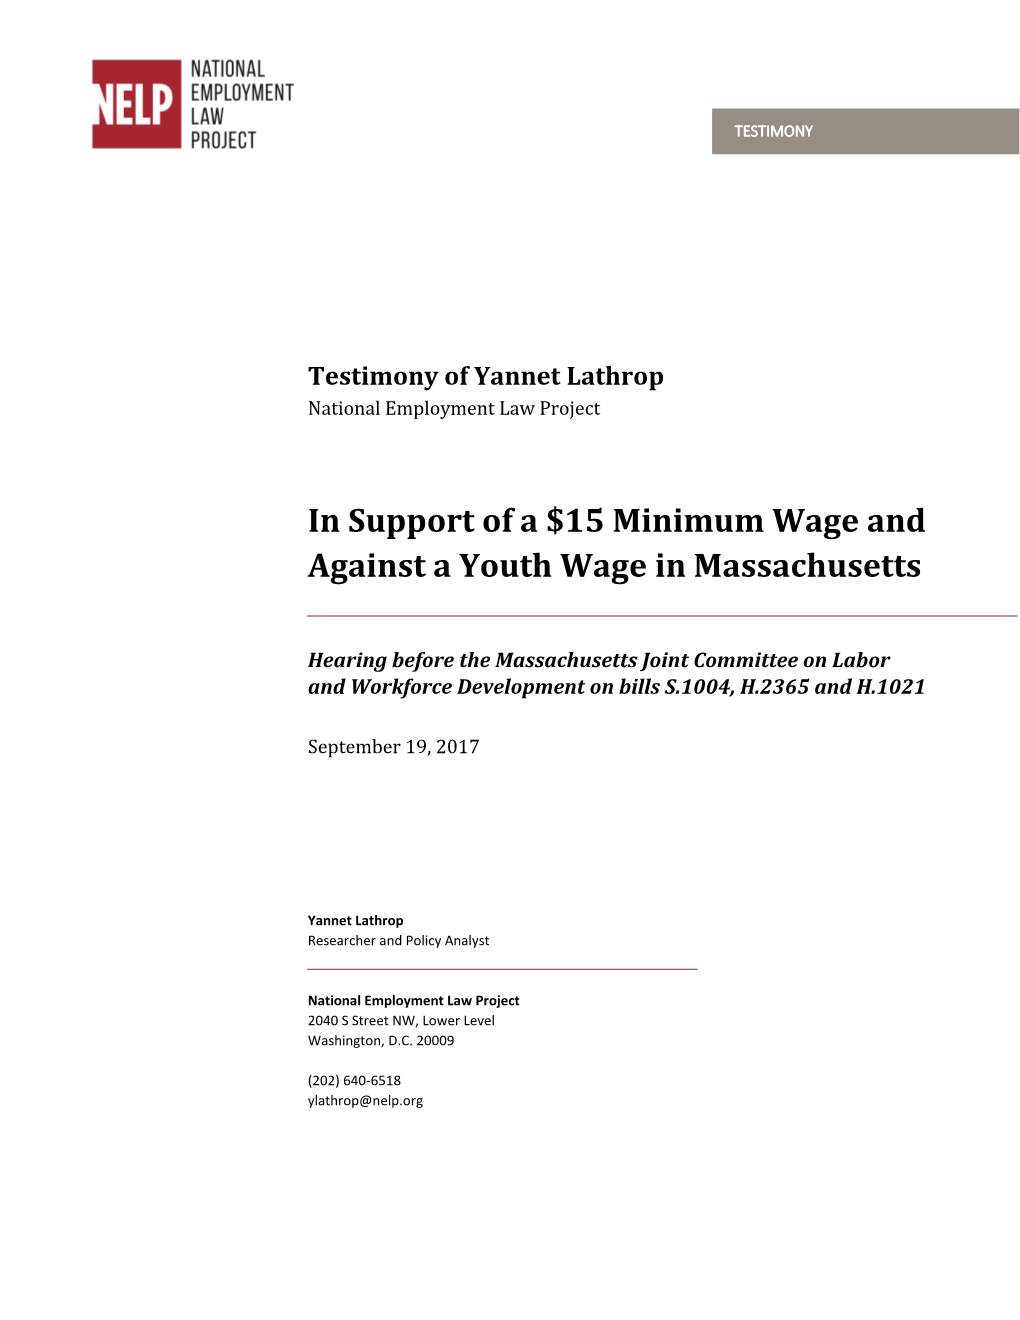 In Support of a $15 Minimum Wage and Against a Youth Wage in Massachusetts